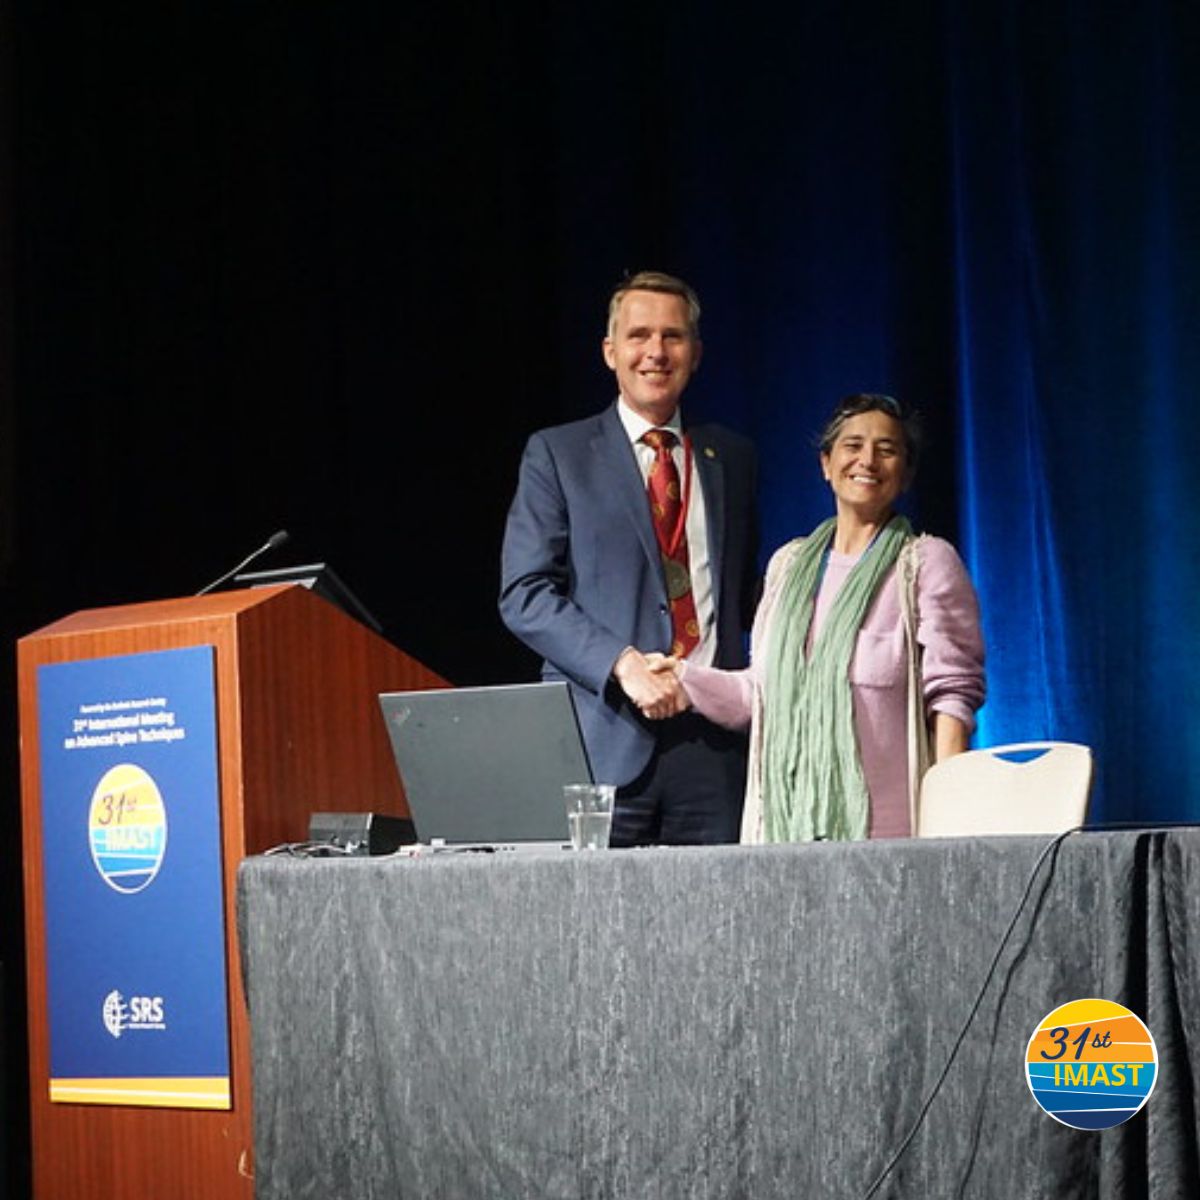 In honor of member Dr. Whitecloud, the Whitecloud Awards are given to best basic science and clinical papers presented at IMAST meeting. This year, we added the Innovation Award & a keynote on Senescence and Aging by Alessandra Sacco, PhD. #SRSIMAST #IMAST2024 #IMASTinSanDiego